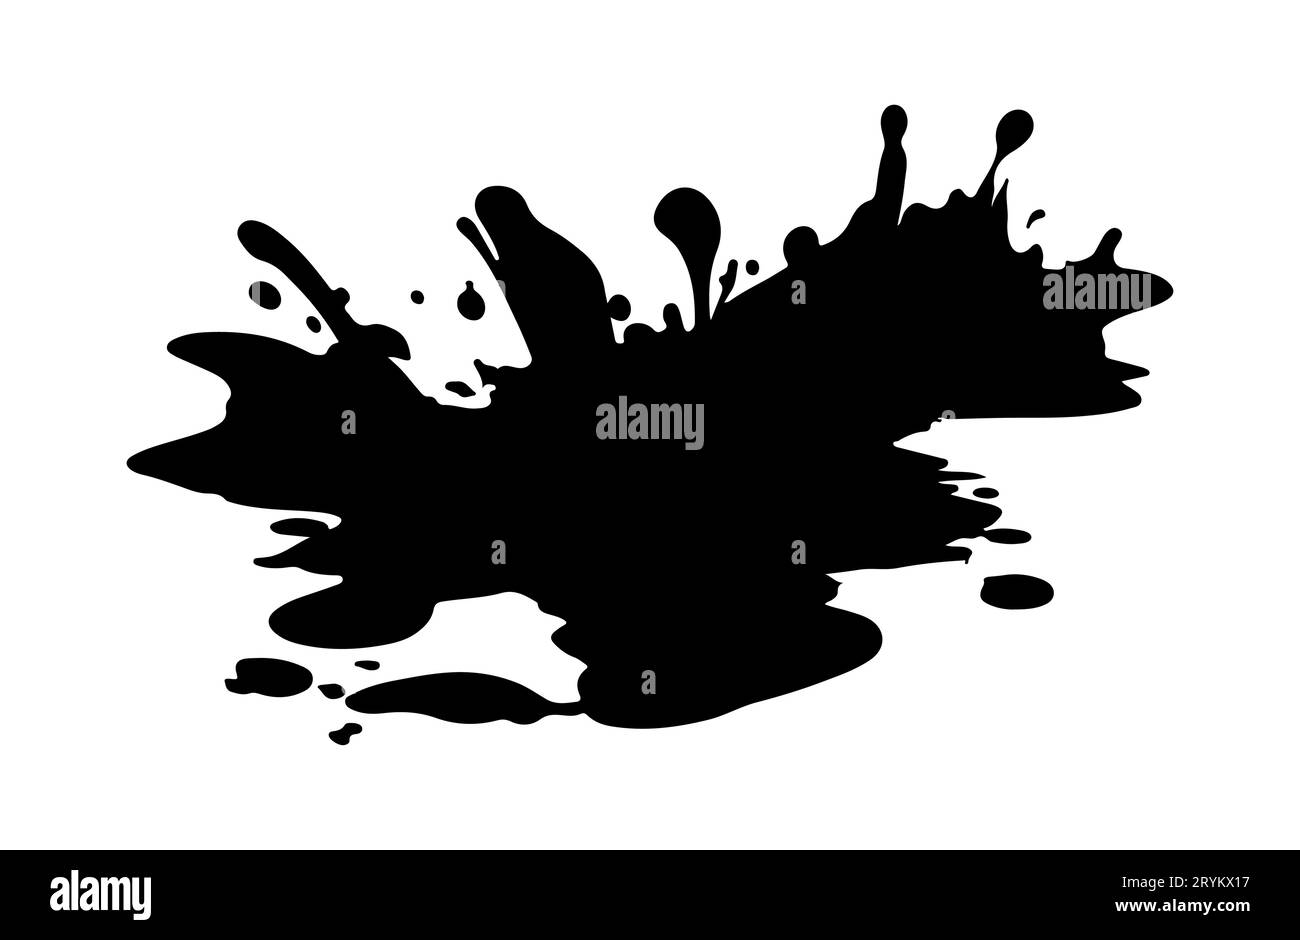 Black silhouette of puddle of water or mud with splashes and drops. Vector isolated on white. Paint, ink, dirt or blood splashes. Stain of splashes, drops of liquid. Dirt blot or blob. Design element Stock Vector